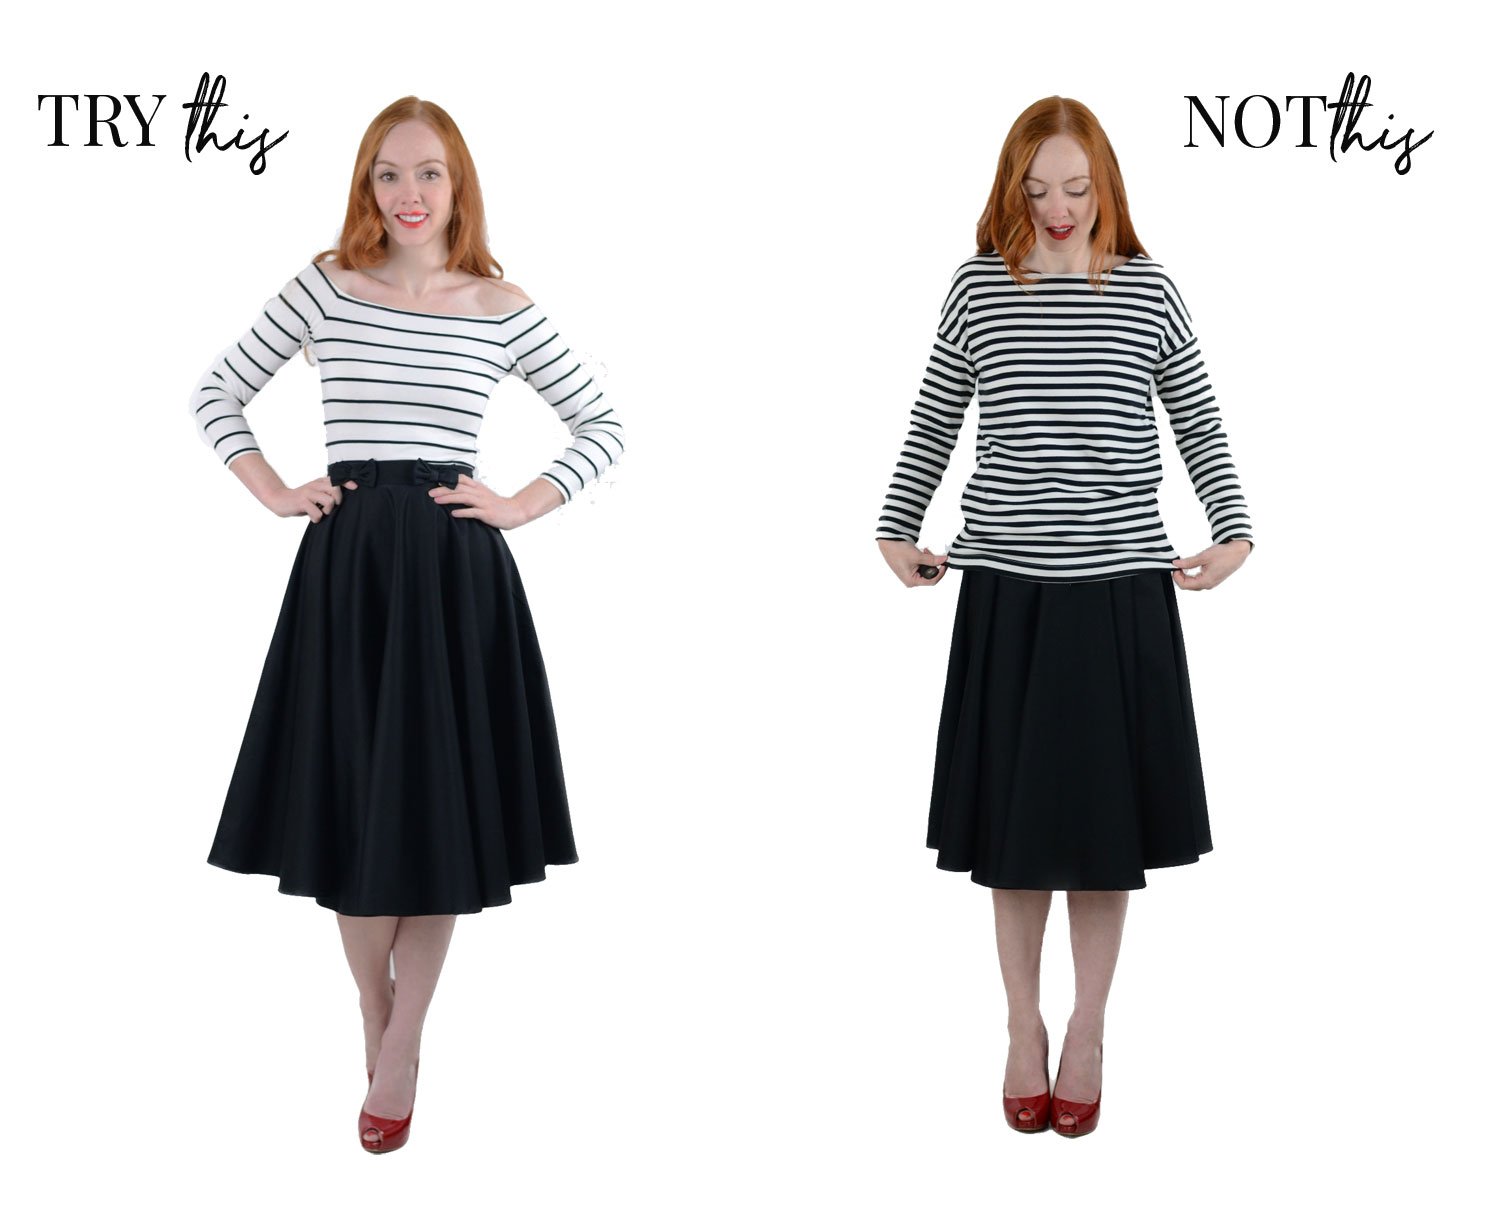 : choosing the right style of top to wear with a midi skirt